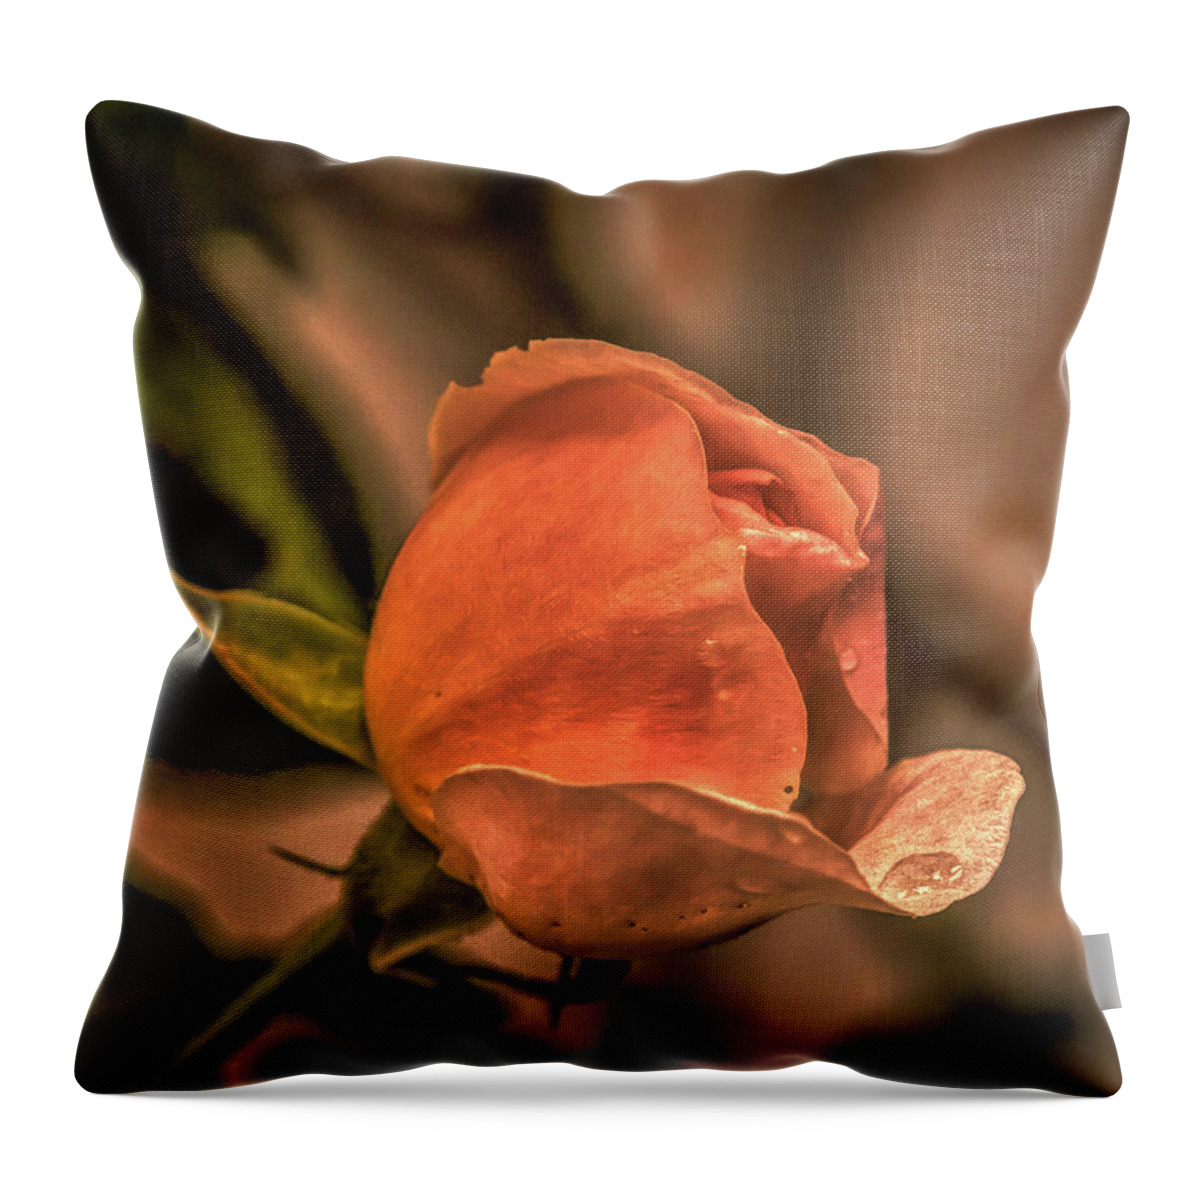 Love Throw Pillow featuring the photograph July 26, 2015 by Leif Sohlman